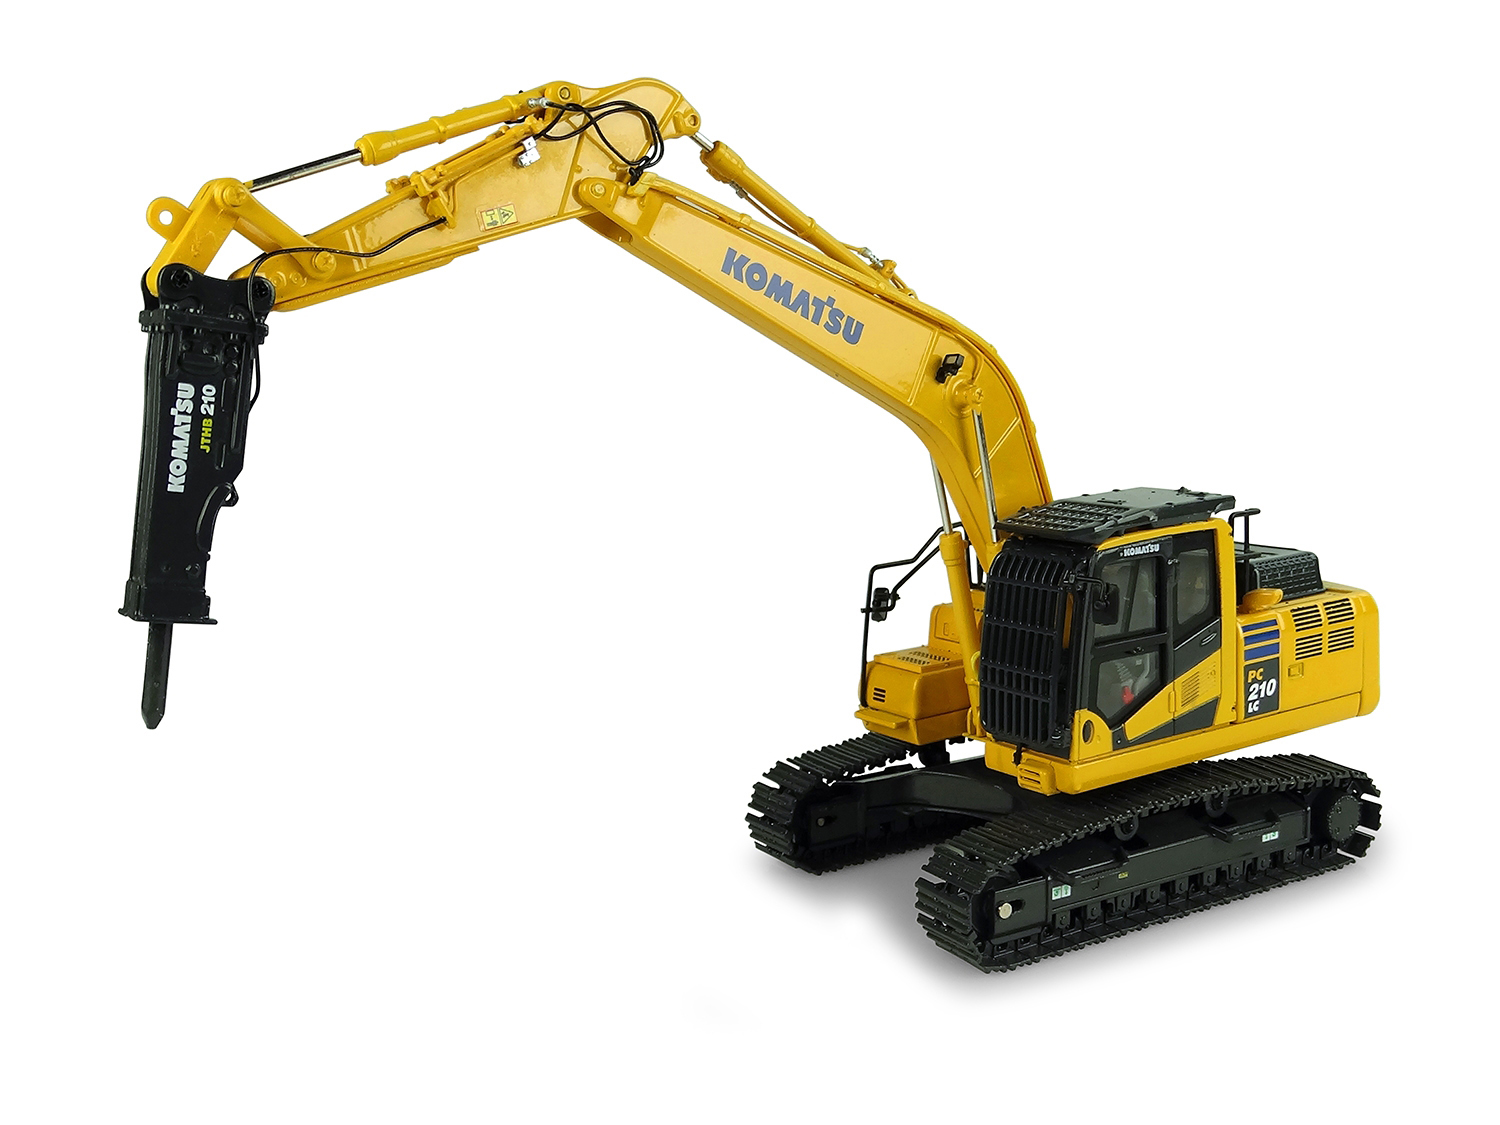 Komatsu PC210LC-11 Tracked Excavator with Hammer Drill 1/50 Diecast Model by Universal Hobbies